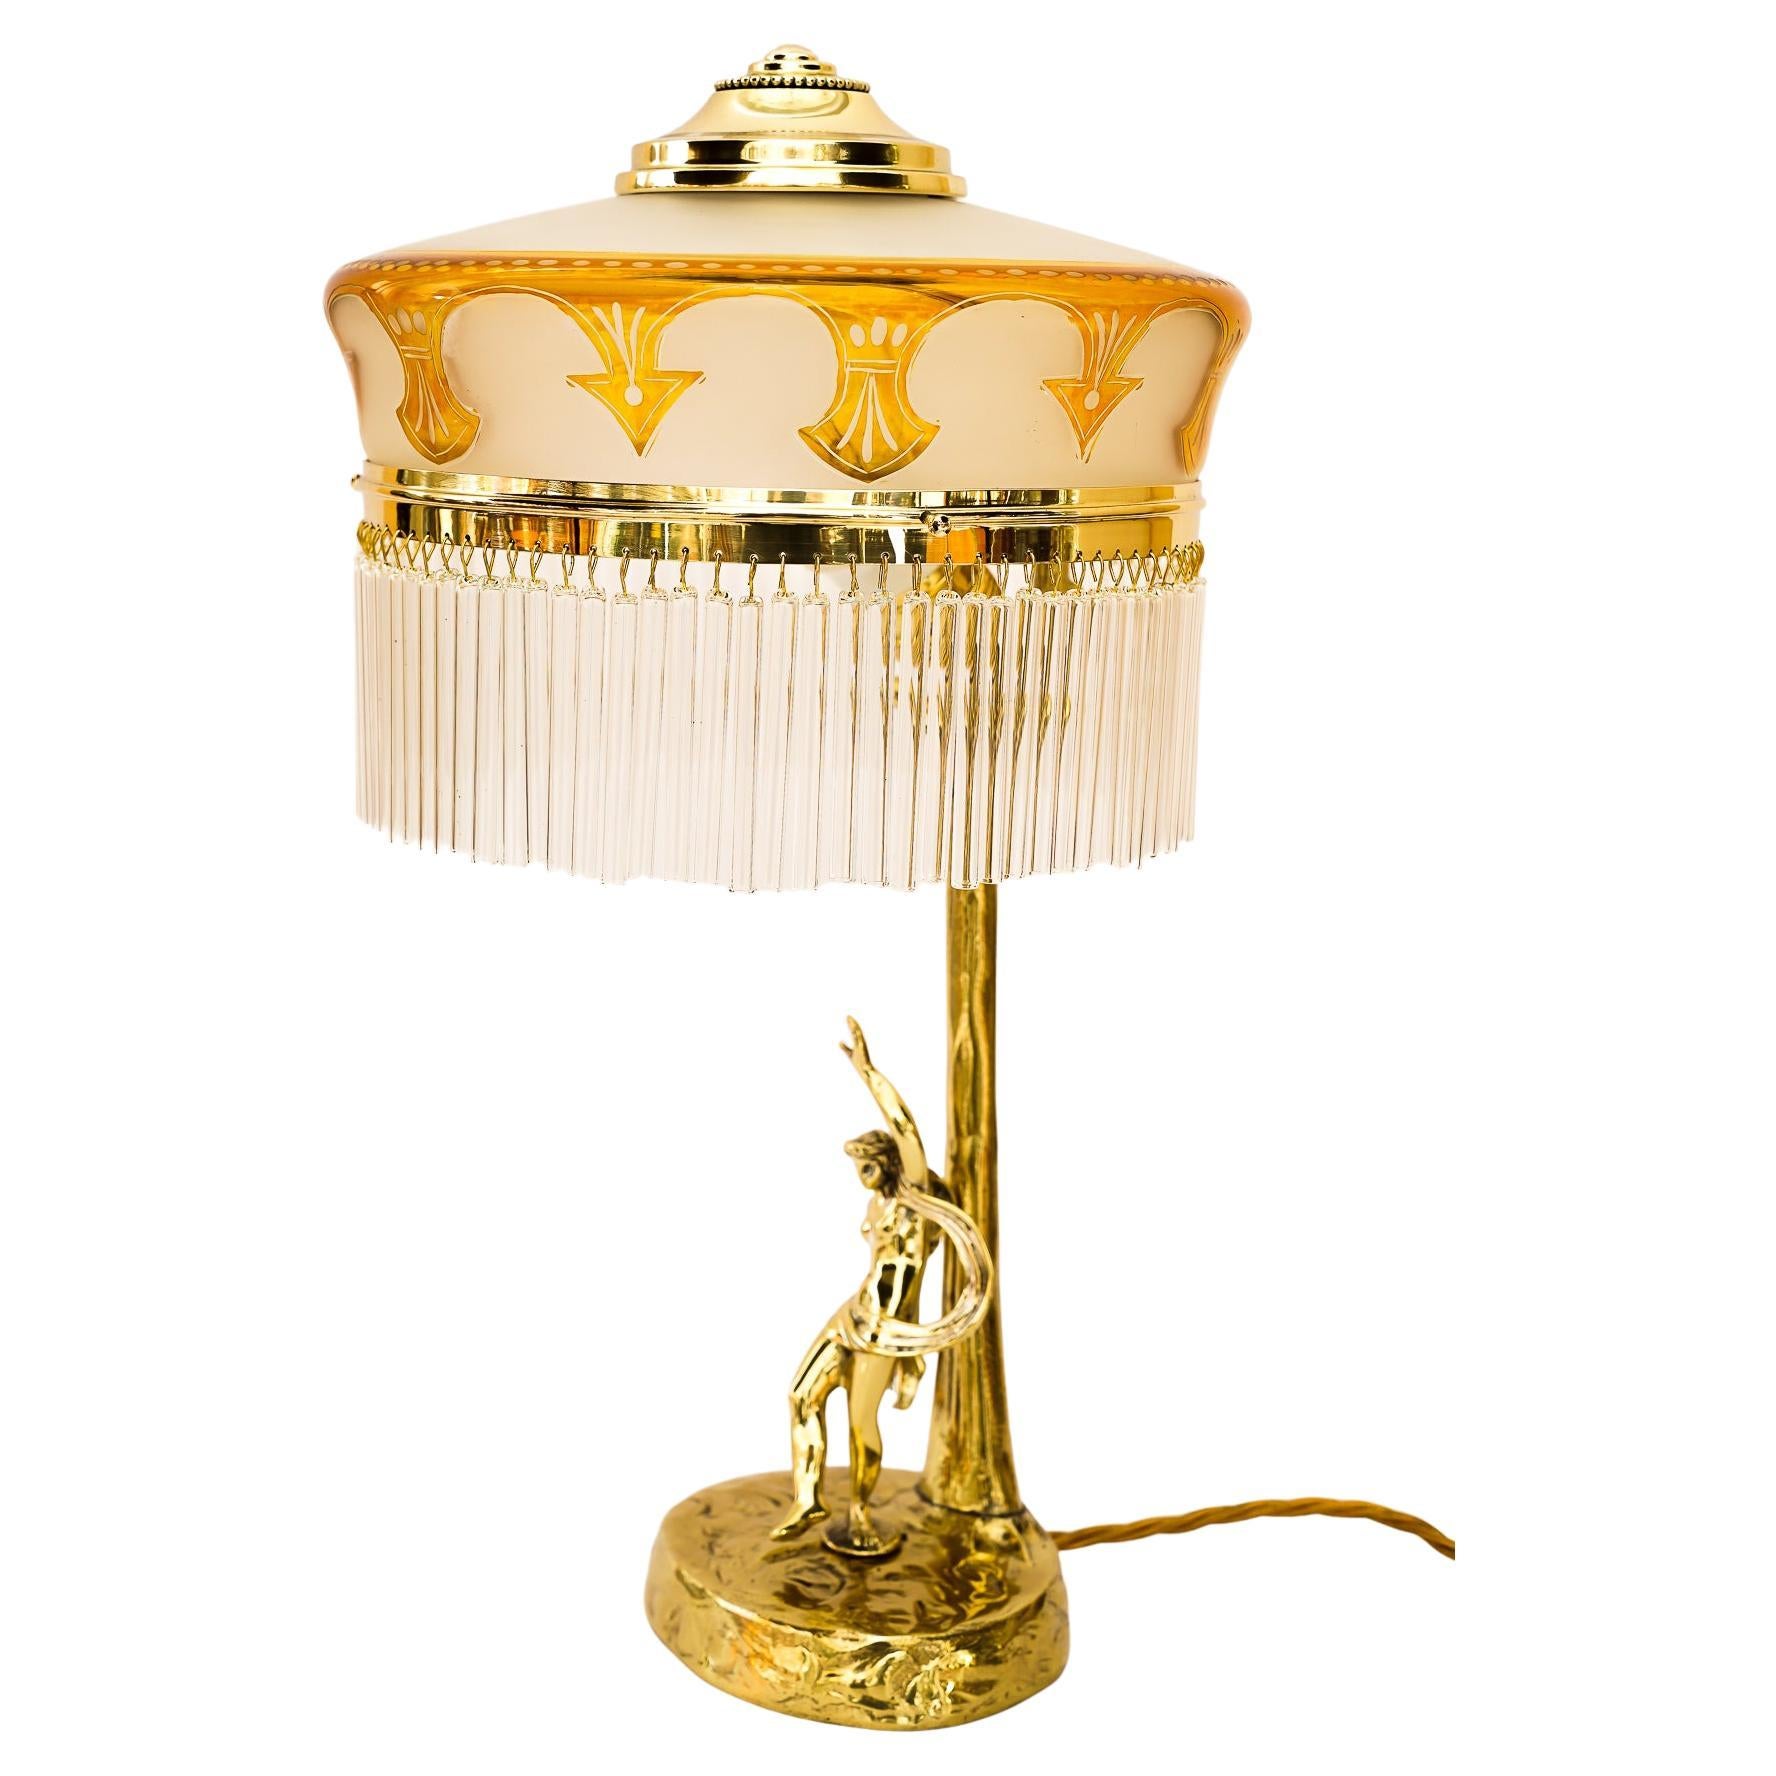 Jugendstil Table Lamp with Original Antique Glass Shade, Vienna, Around 1910s For Sale